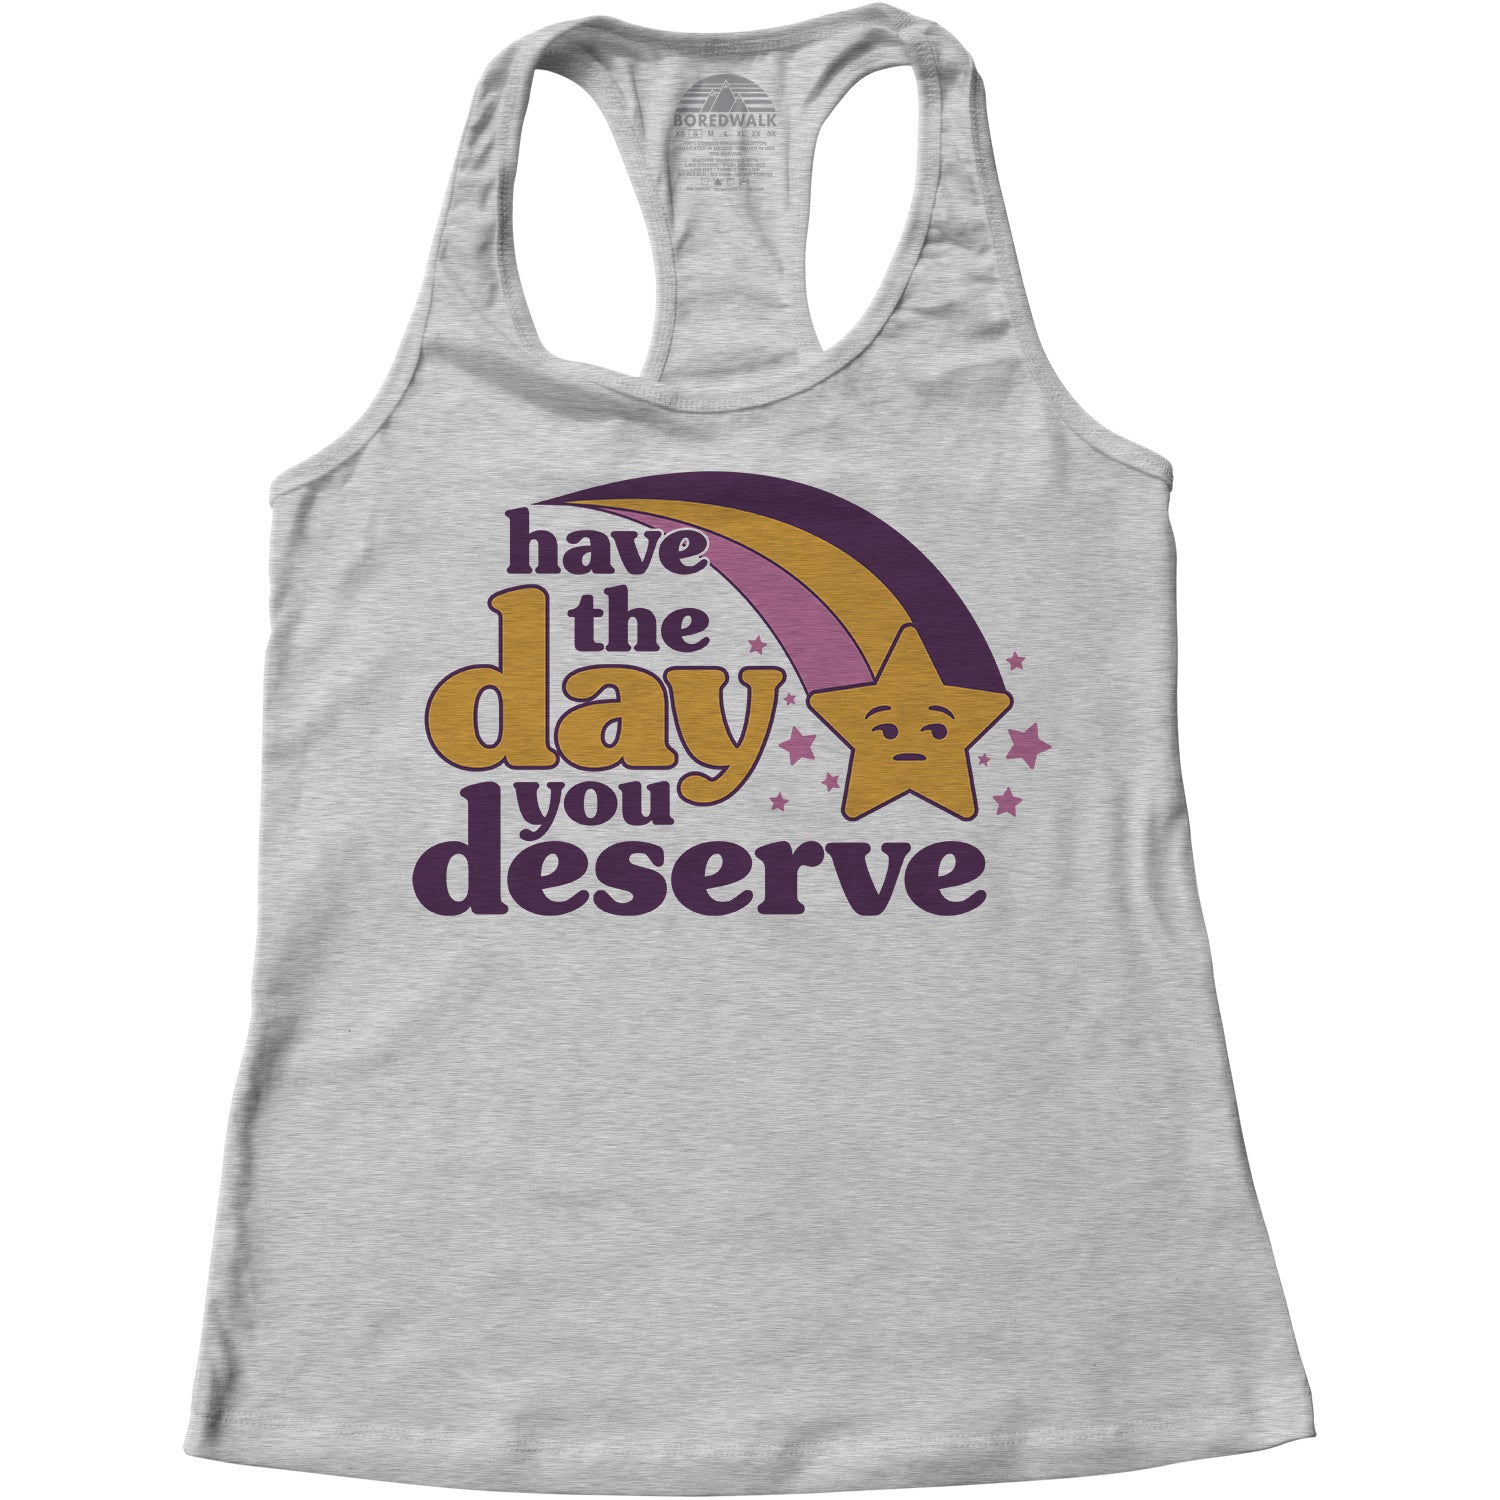 Women's Have The Day You Deserve Racerback Tank Top